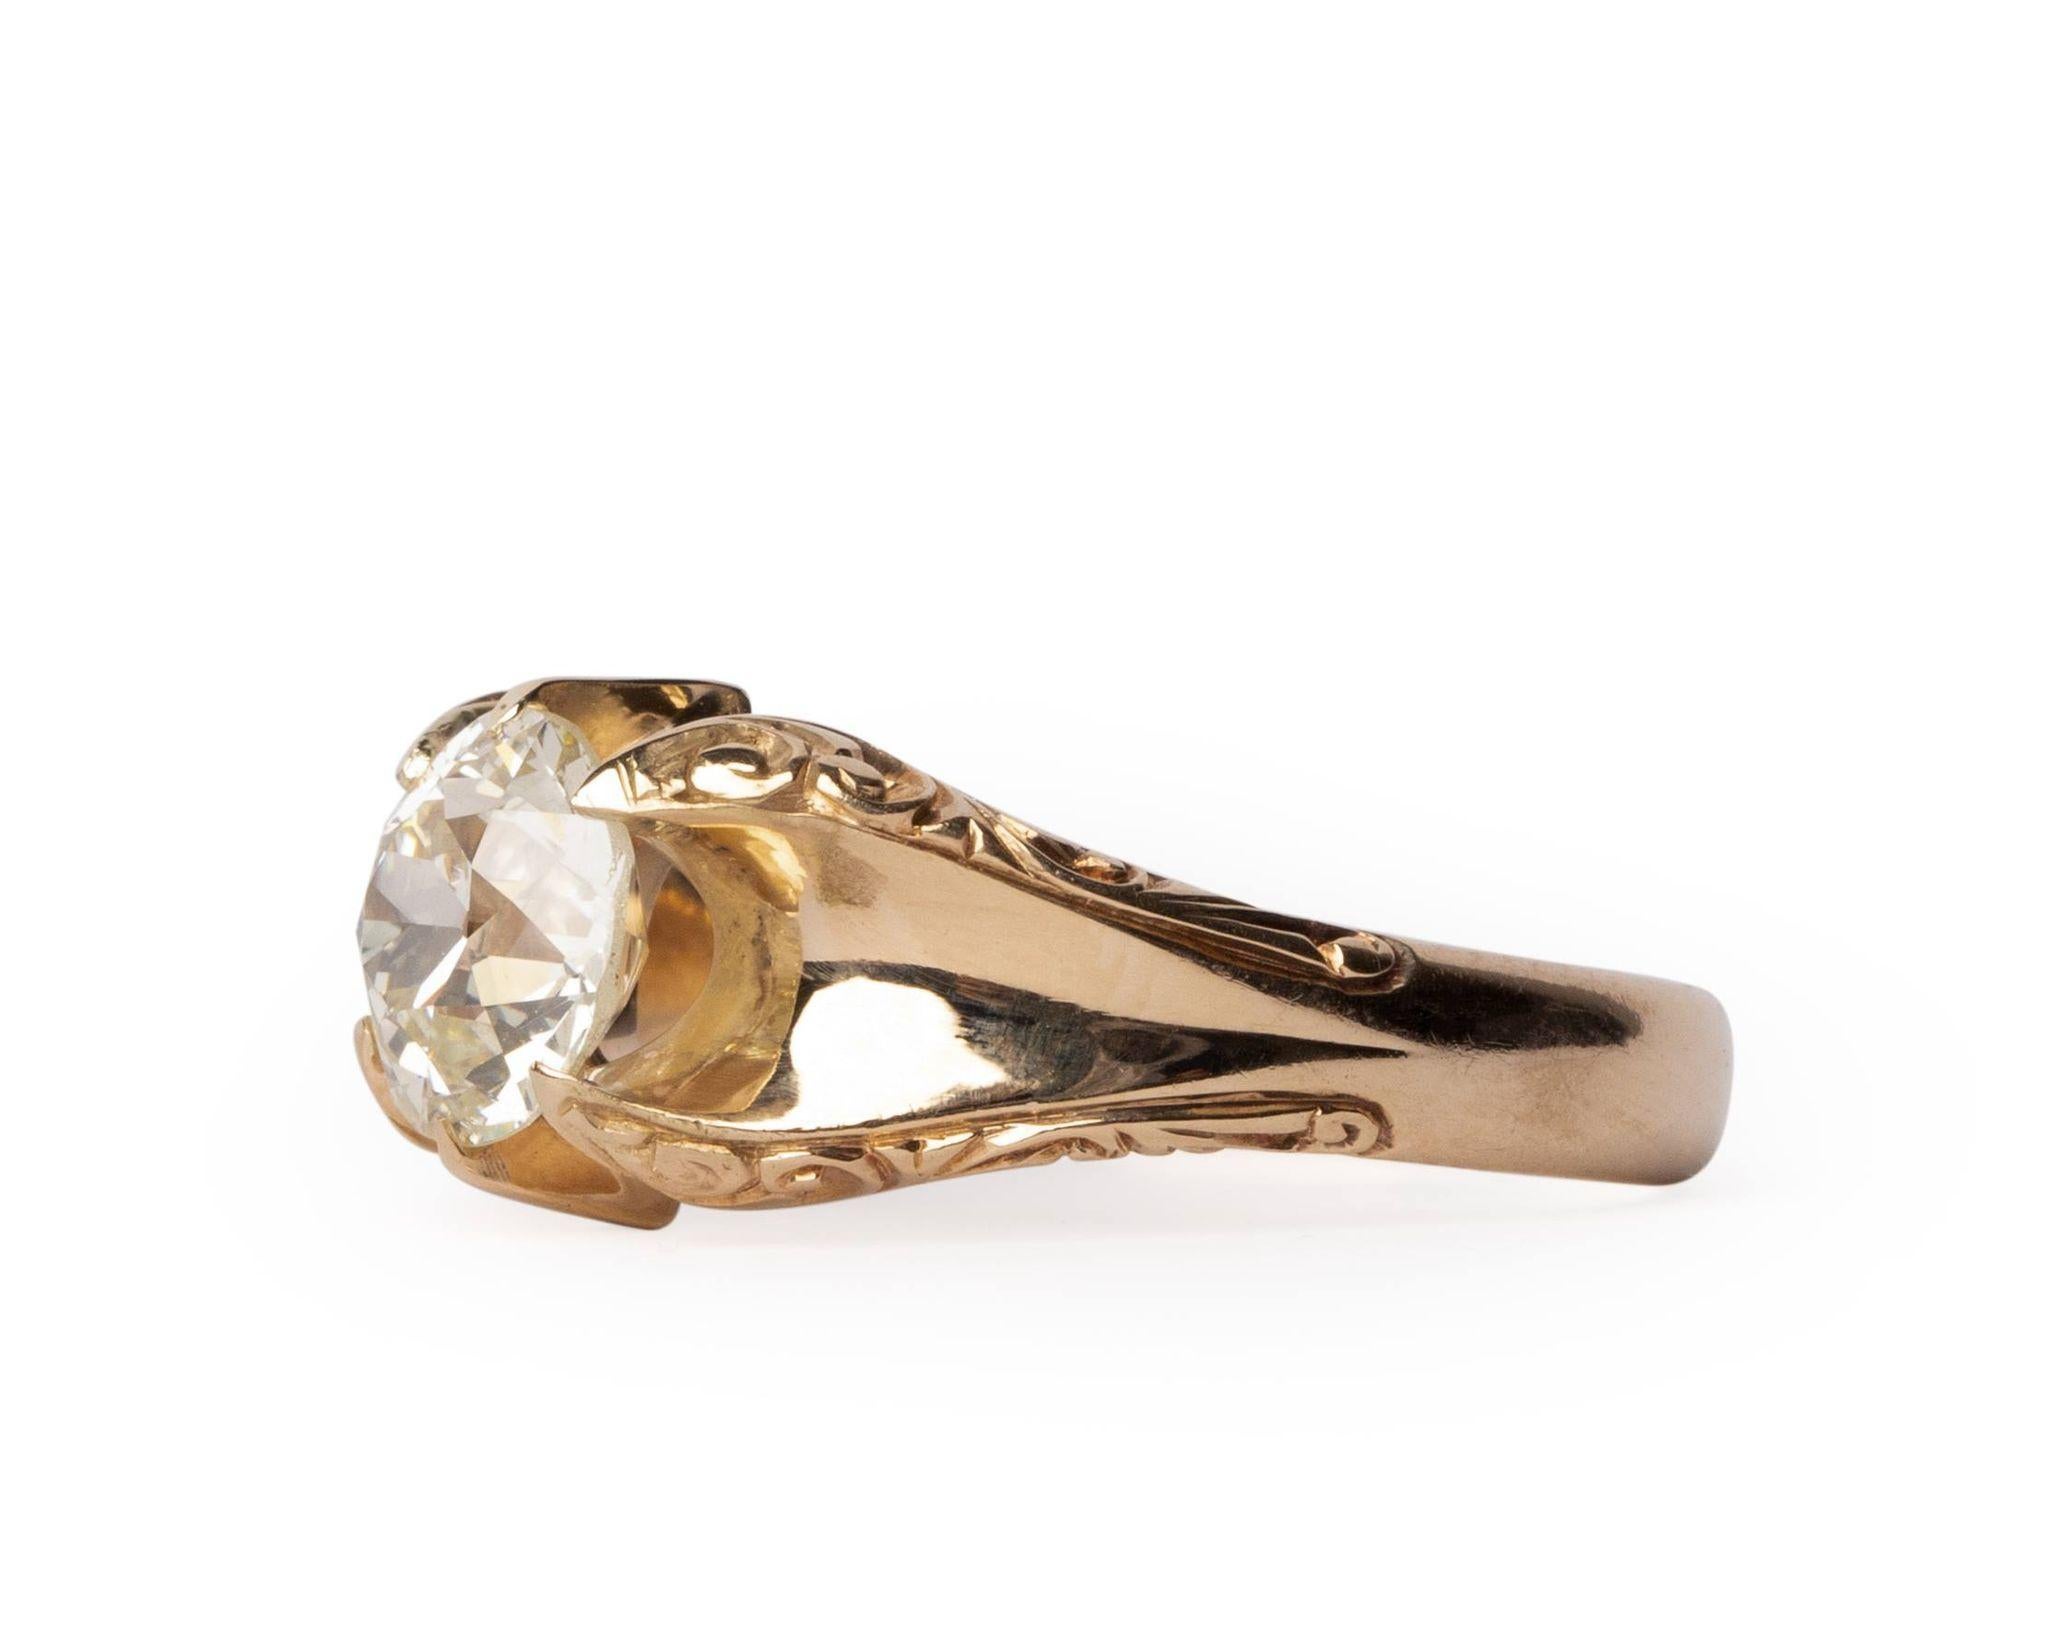 Here we have a beautiful example of a belcher style diamond ring! This 1920's ring features a stunning,  2.32 Carat Old European cut diamond set beautifully in a simple yet elegant yellow gold ring. The beautifully crafted ring is adorn beautiful